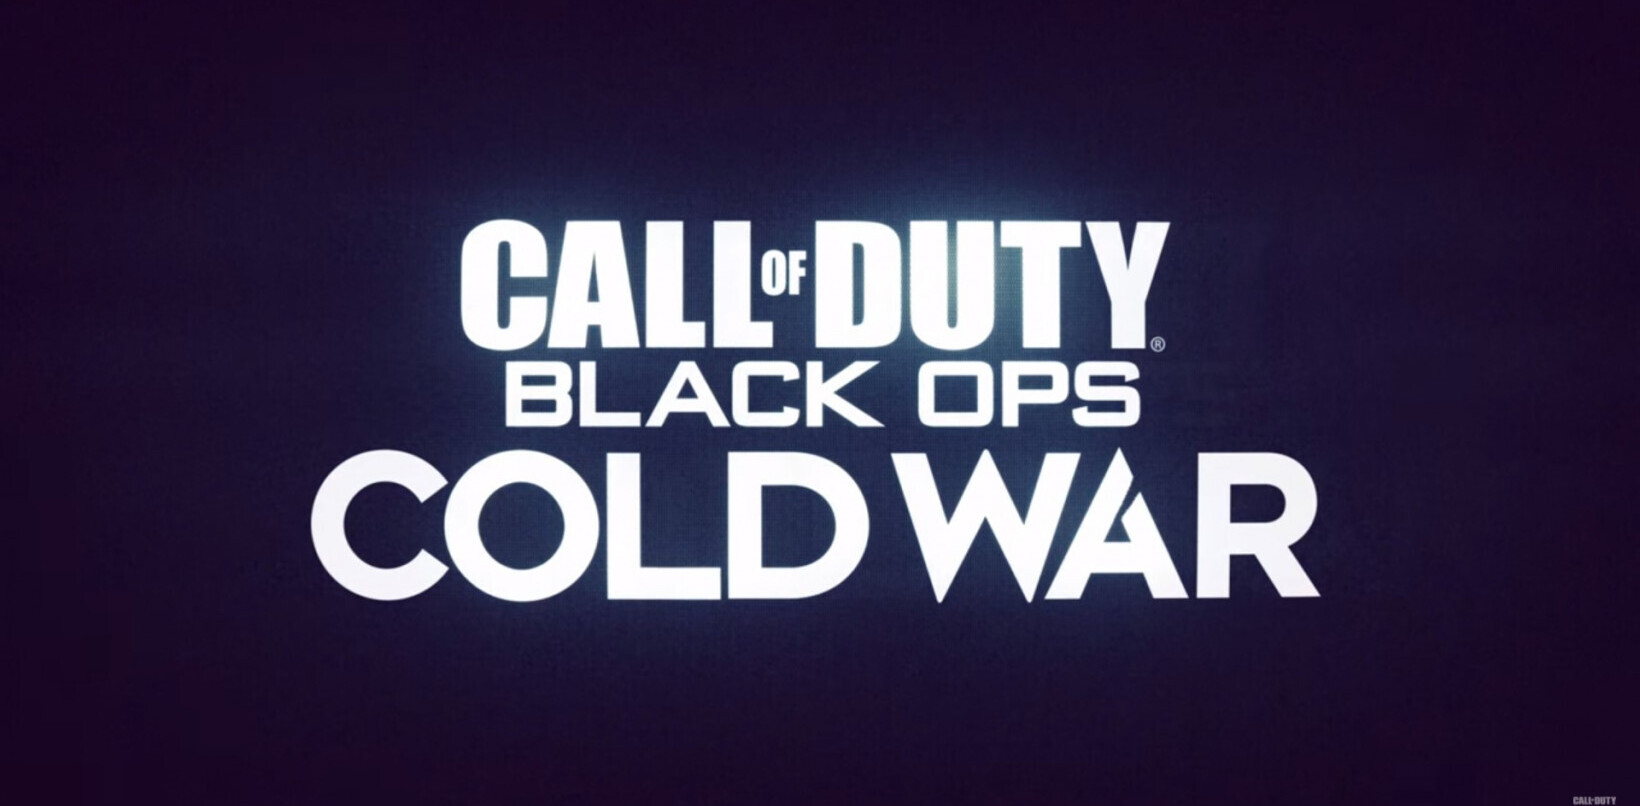 Activision bumps base price of PS5 and XSX games to $69.99, starting with Black Ops Cold War